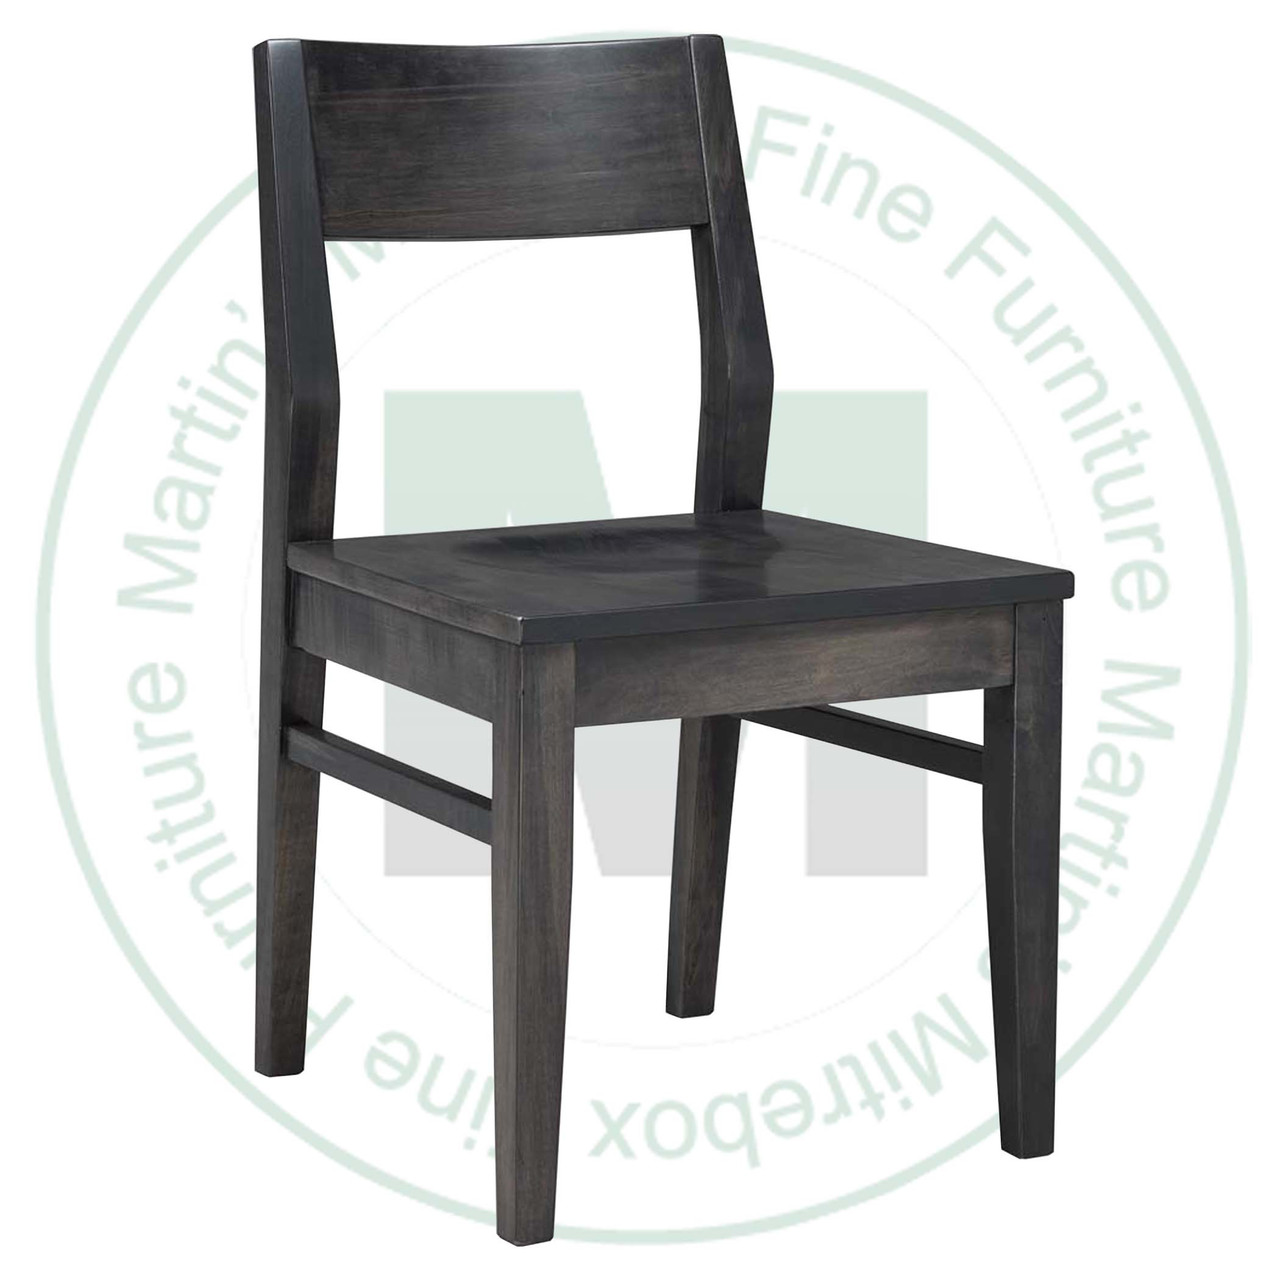 Maple Stanford Side Chair With Wood Seat